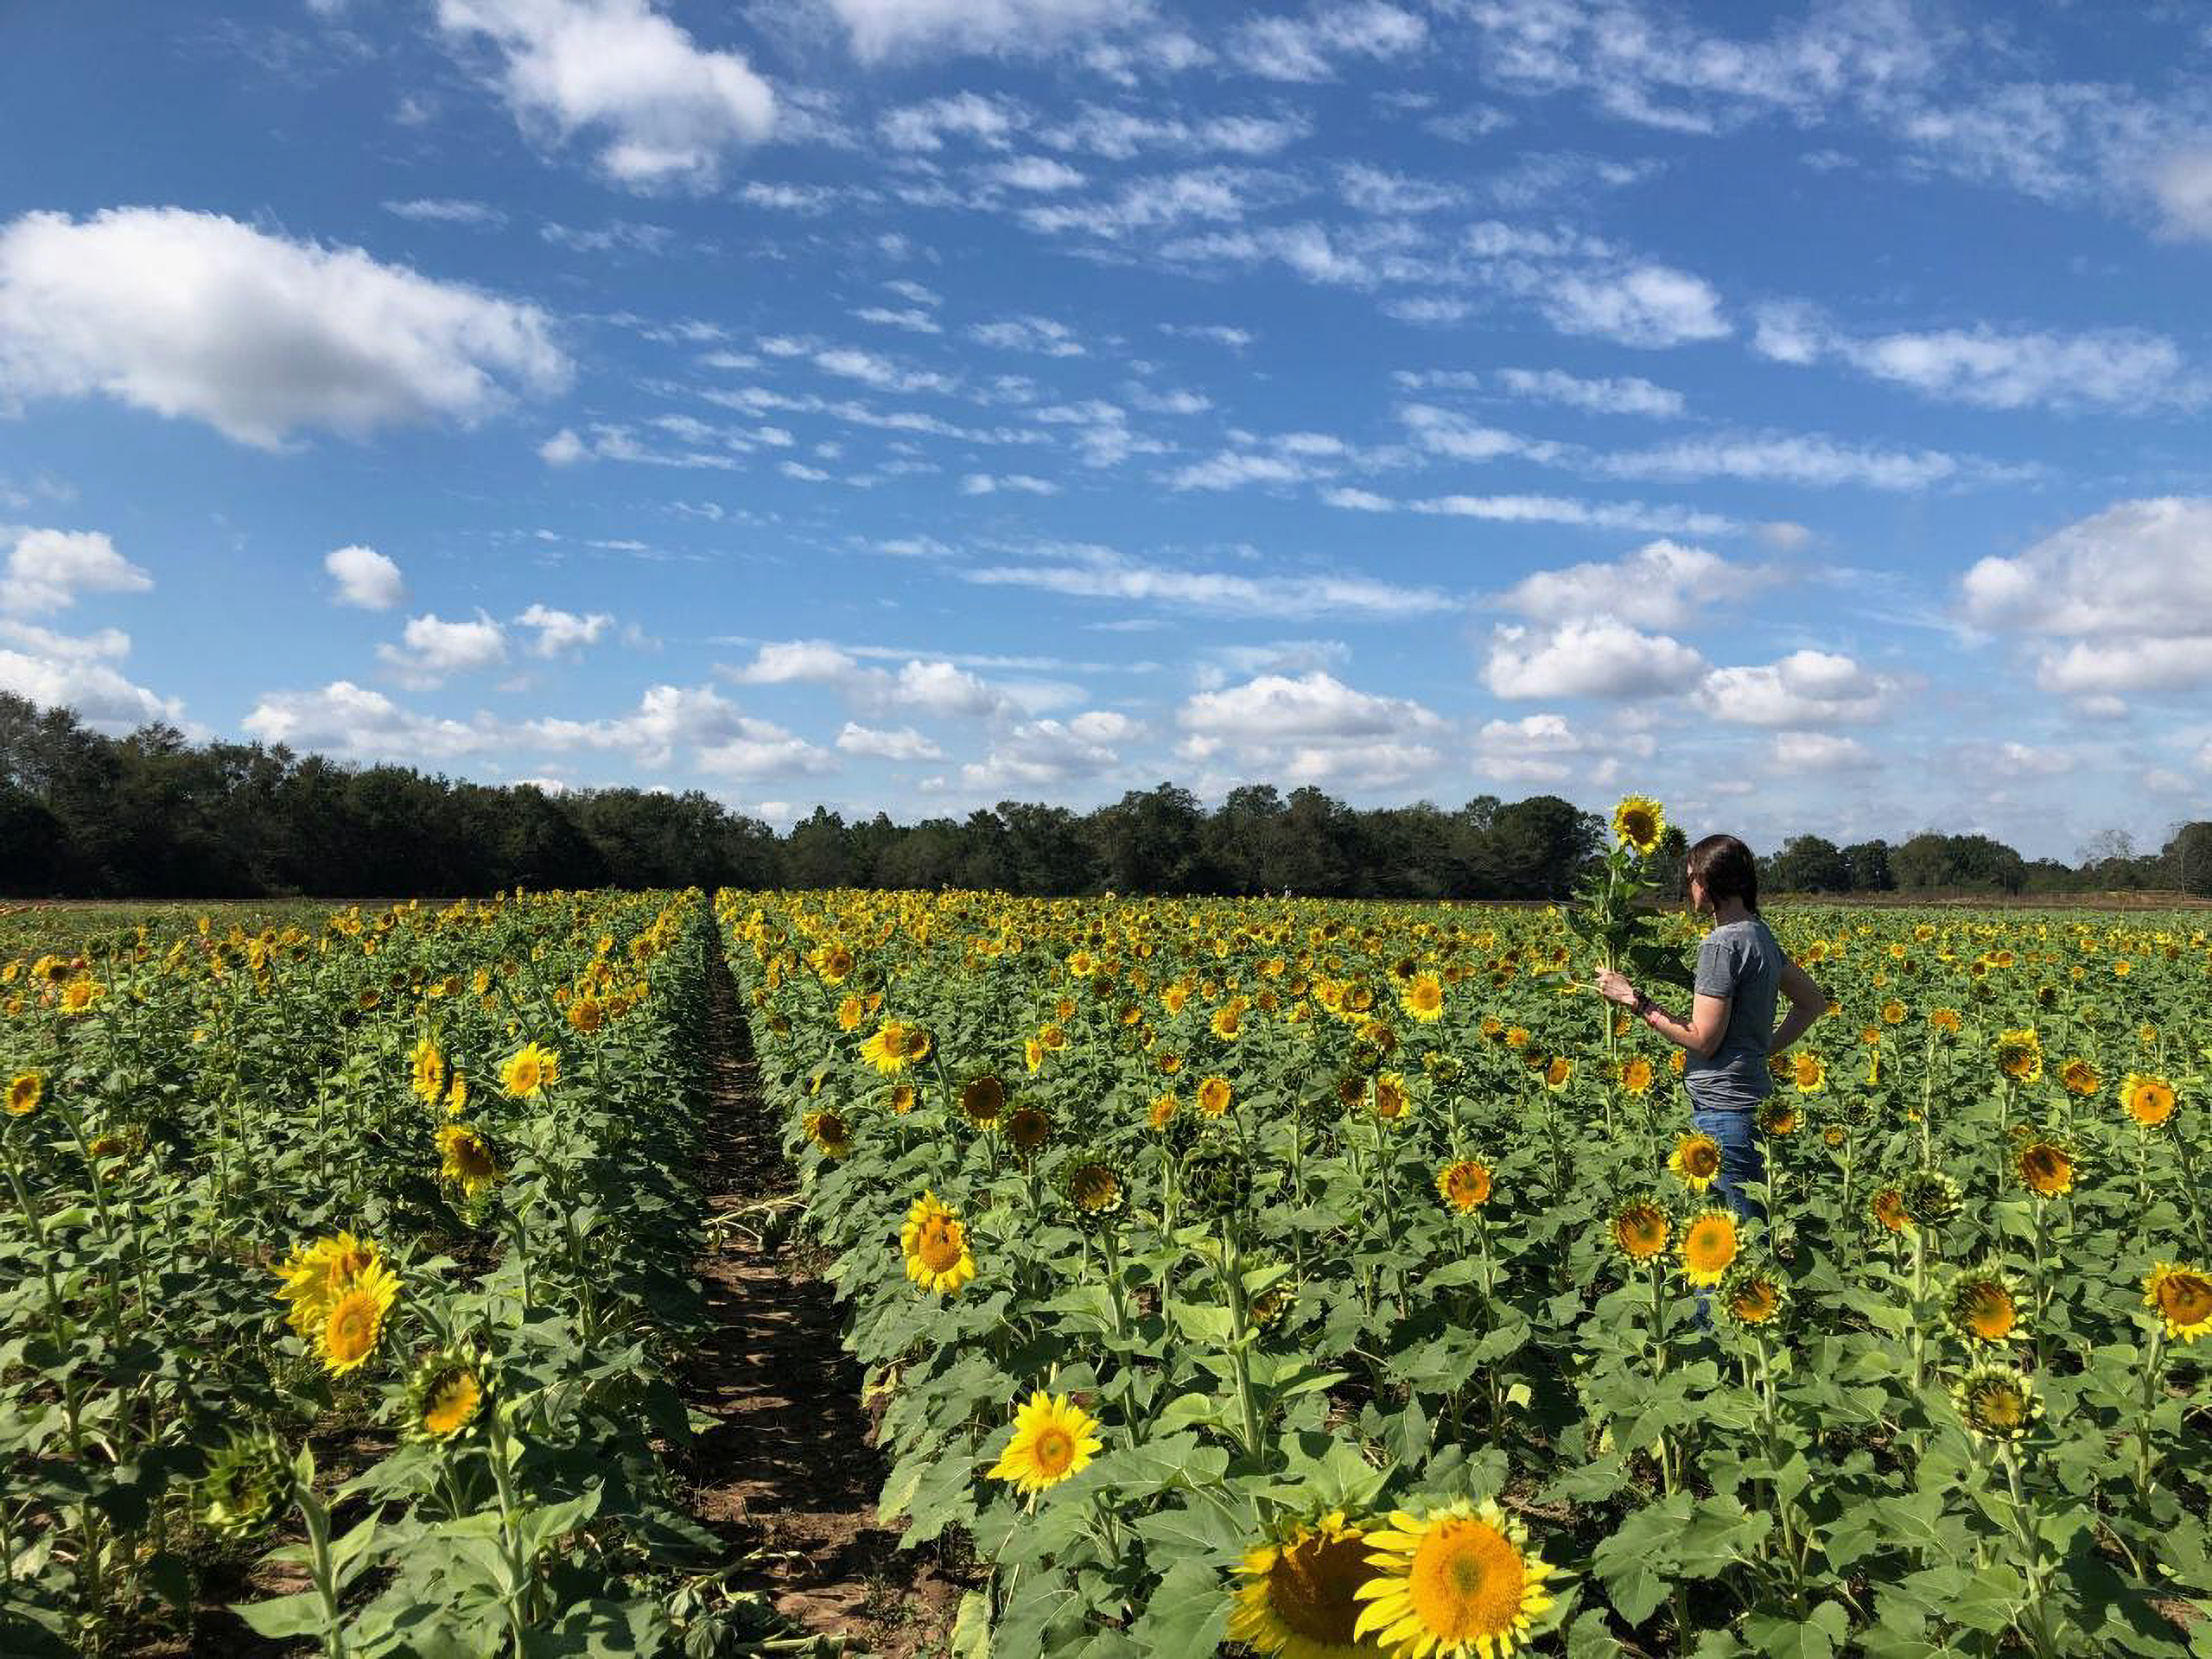 A photo of a lady picking sunflowers in a sunflower field.